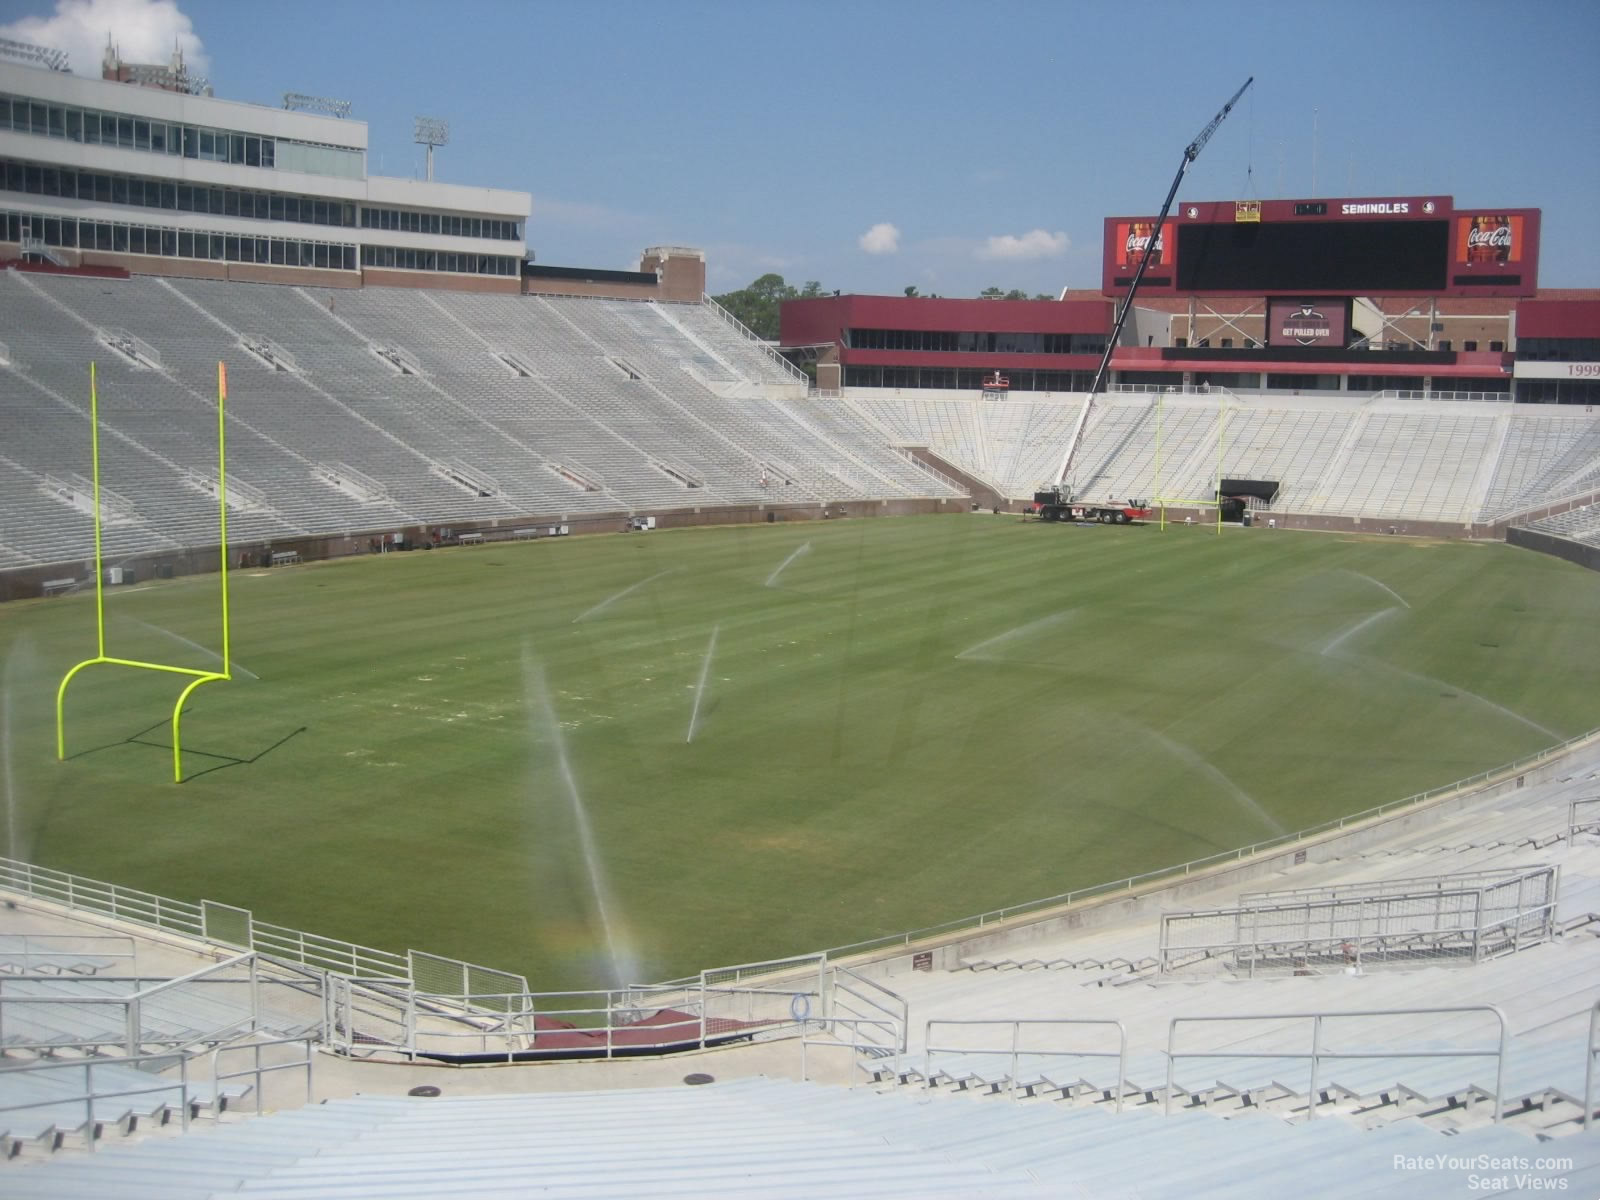 section 117, row 40 seat view  - doak campbell stadium